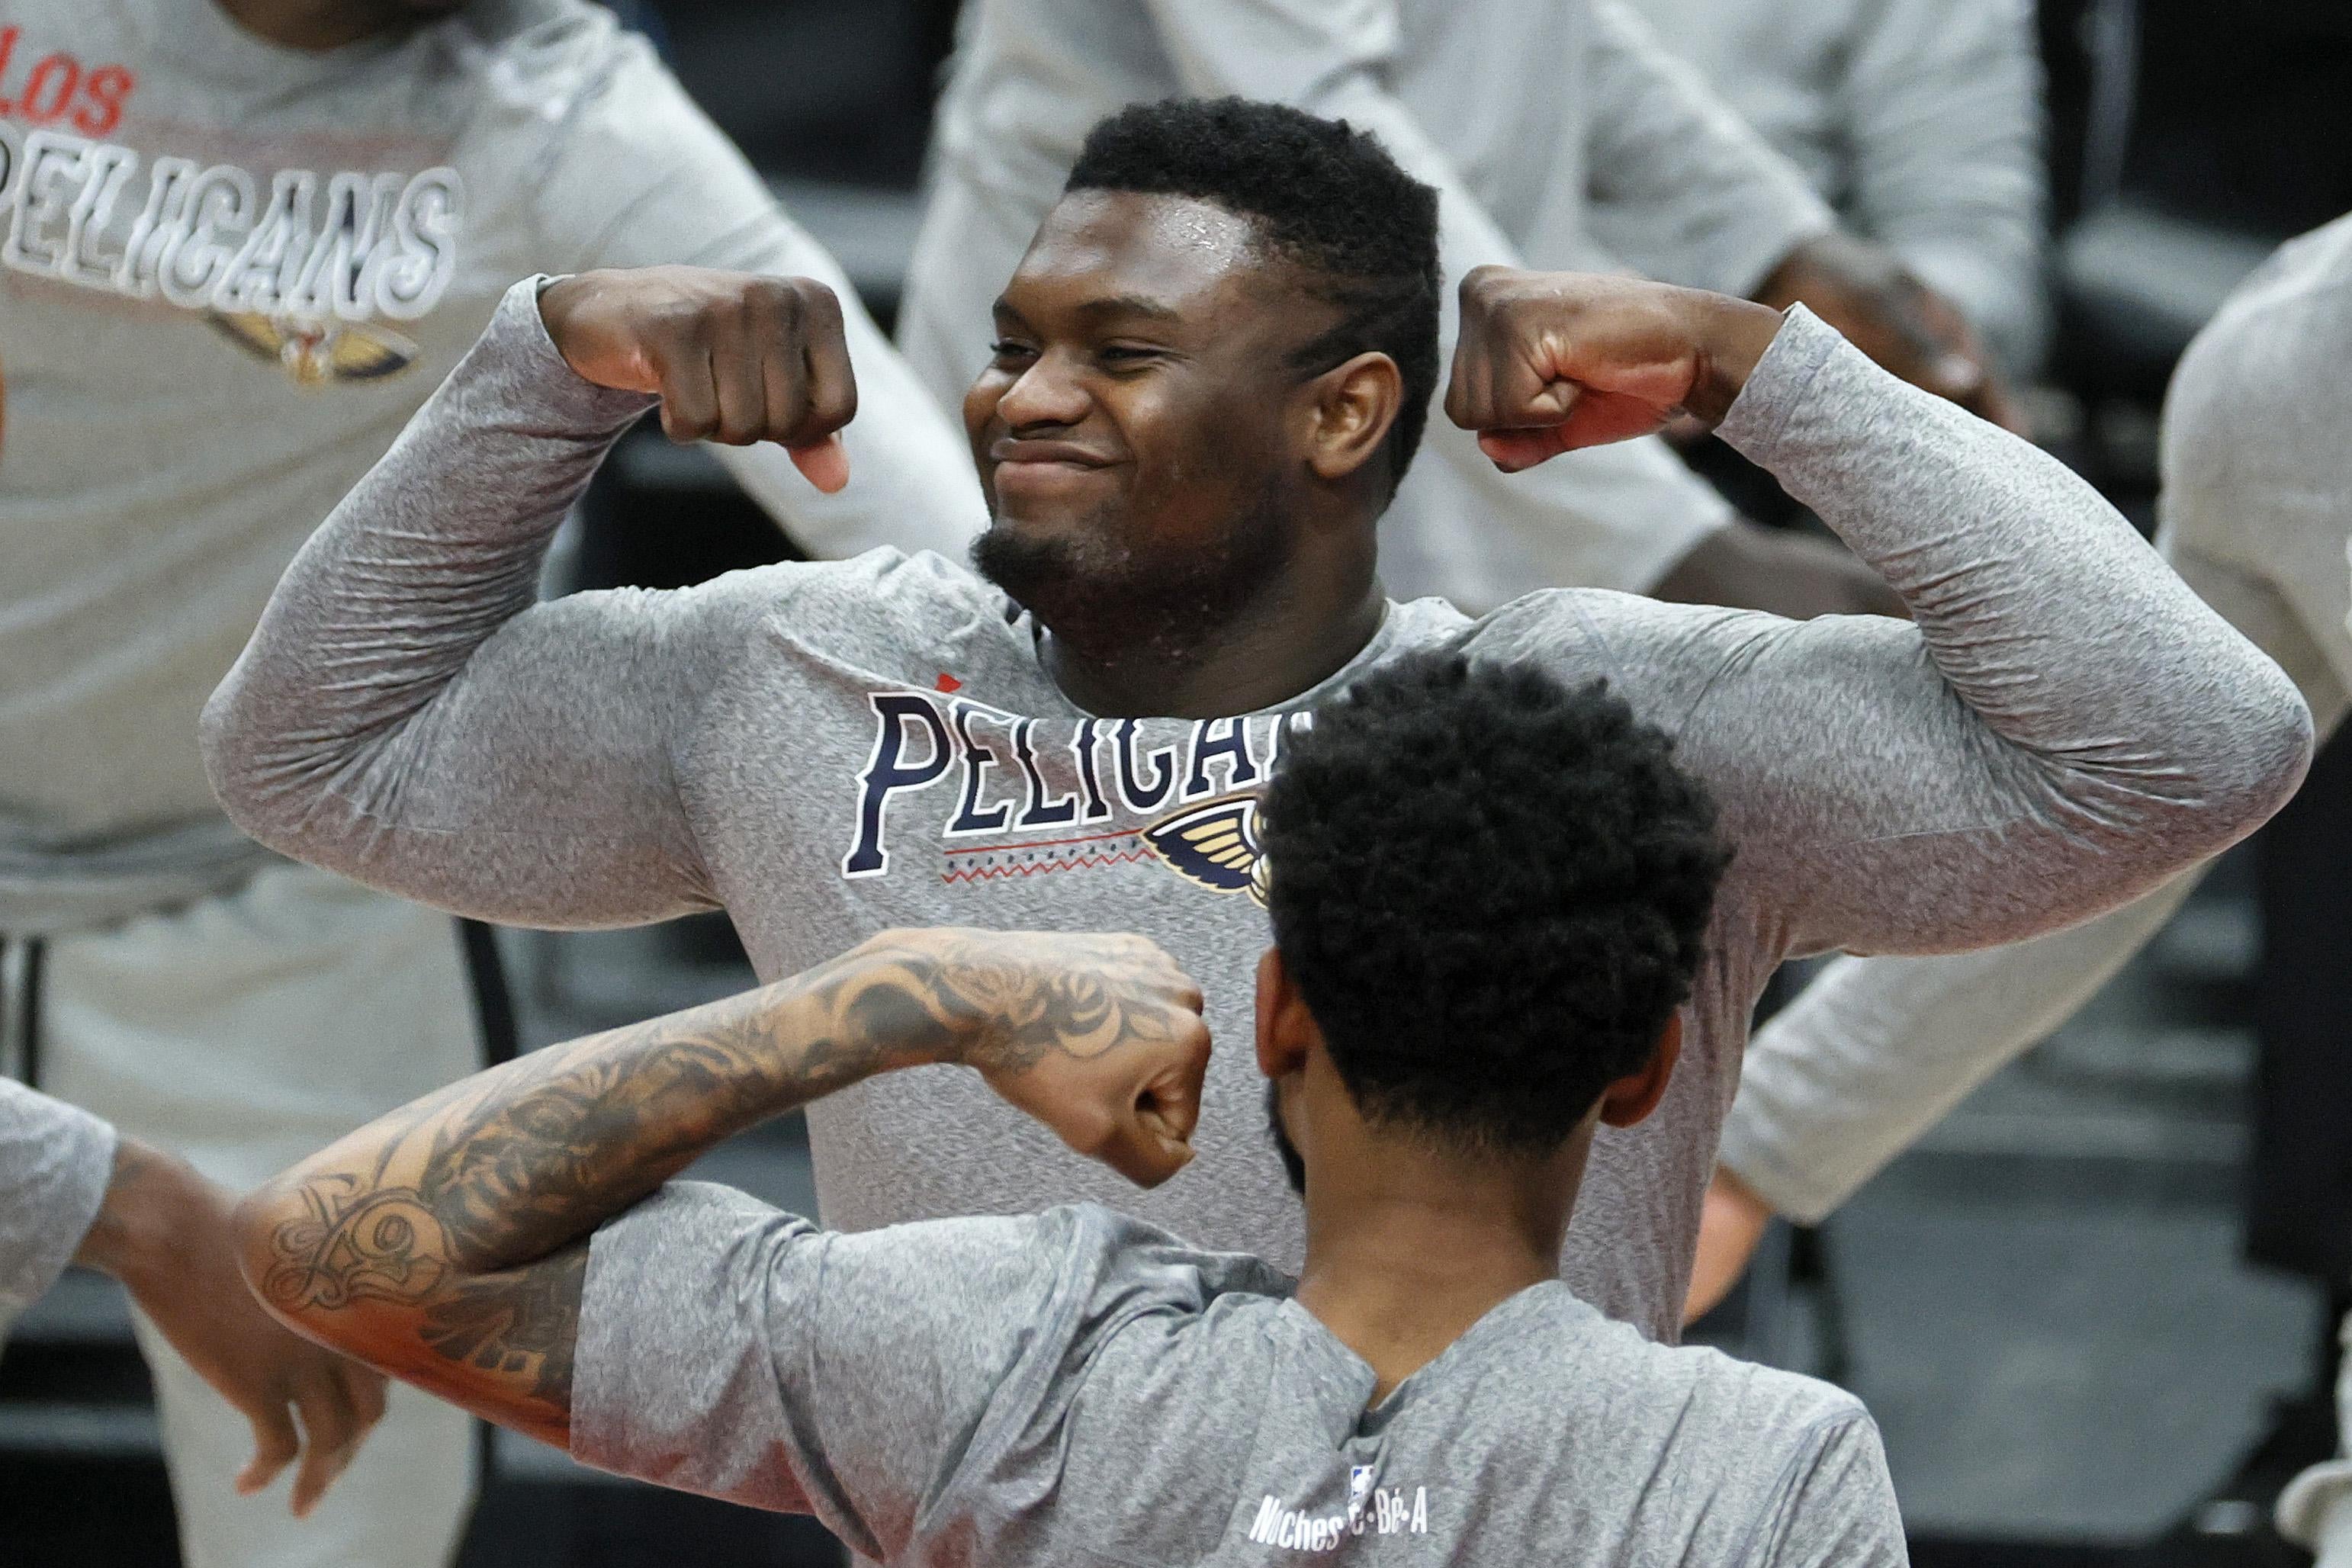 PORTLAND, OREGON - MARCH 18: Zion Williamson #1 of the New Orleans Pelicans is announced before the game against the Portland Trail Blazers at Moda Center on March 18, 2021 in Portland, Oregon. NOTE TO USER: User expressly acknowledges and agrees that, by downloading and or using this photograph, User is consenting to the terms and conditions of the Getty Images License Agreement. (Photo by Steph Chambers/Getty Images)